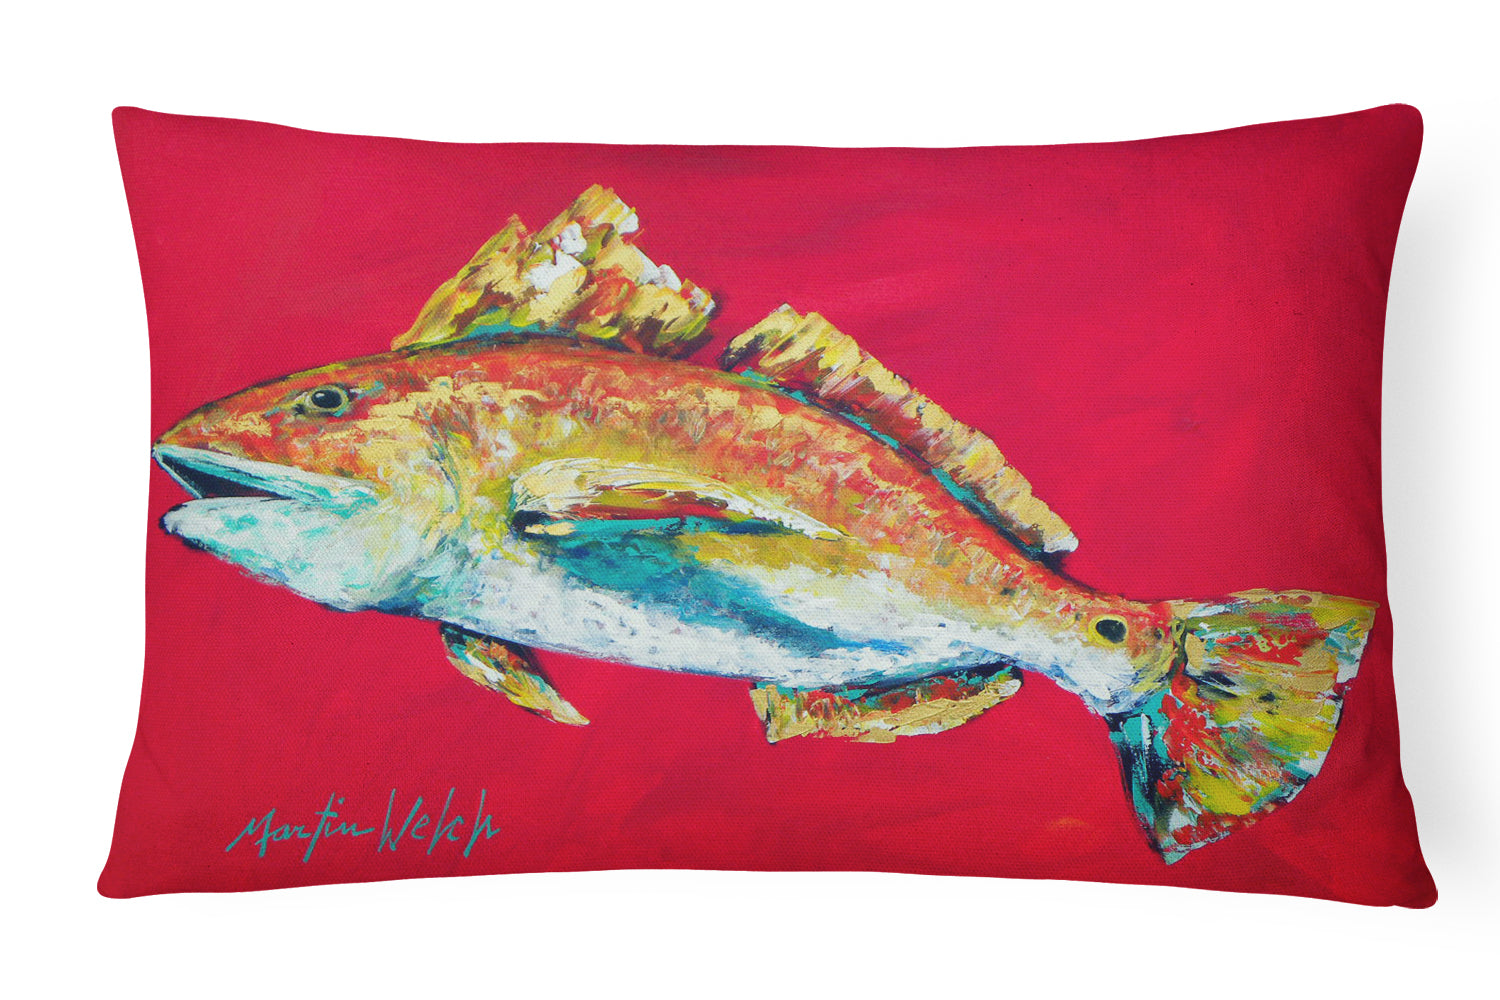 Buy this Fish - Red Fish Woo Hoo Canvas Fabric Decorative Pillow